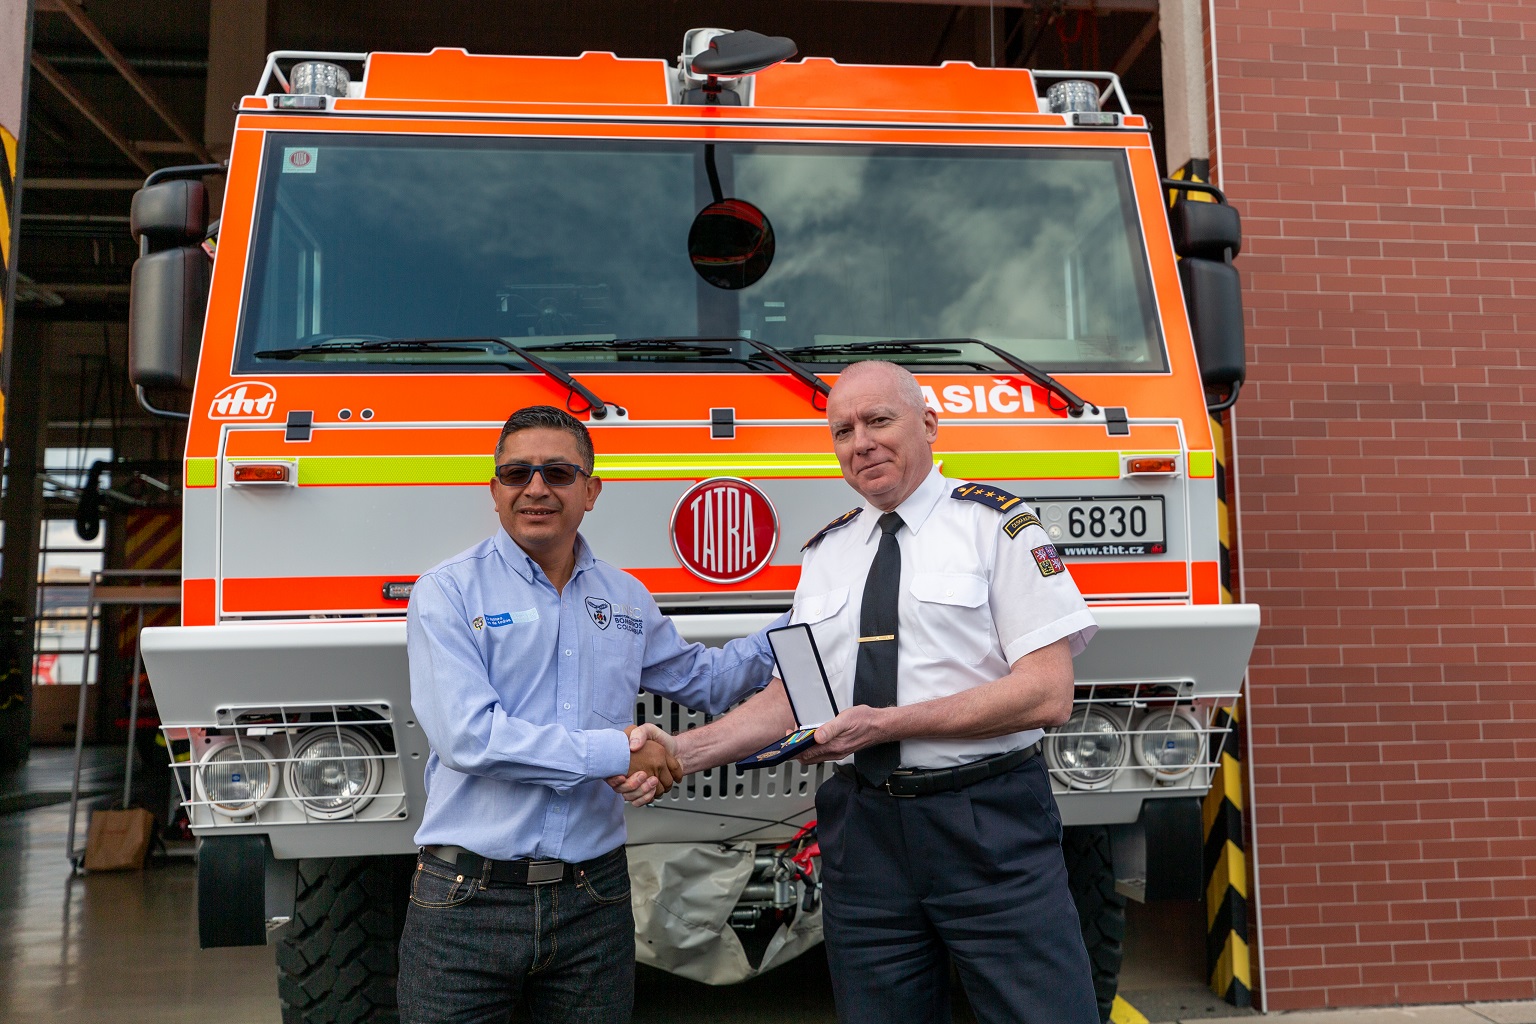 Joint photo in front of fire truck.jpg